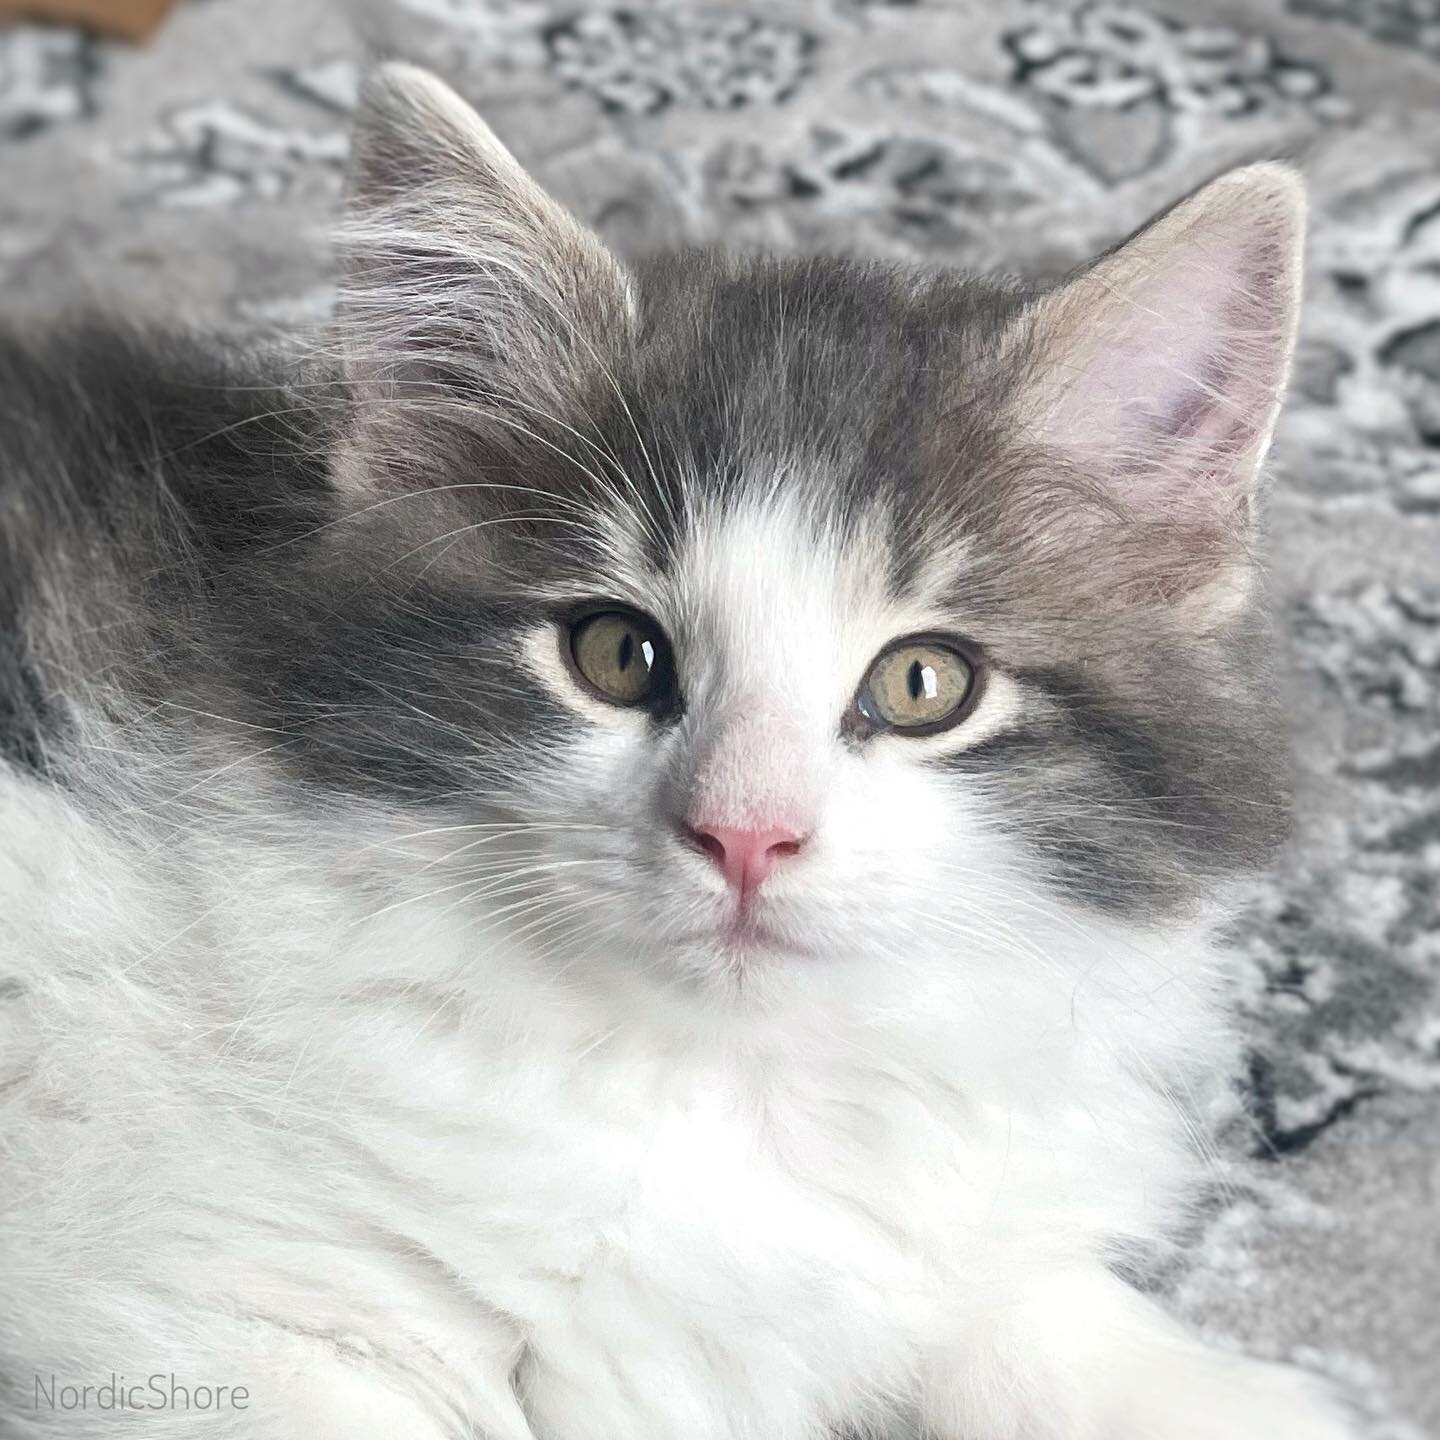 Svend, what a sweetly serious look! 💕🐾💕🐾
.
.
#Norwegianforestcats #norwegianforestcat #norwegianforestkittens #norwegianforestkitten